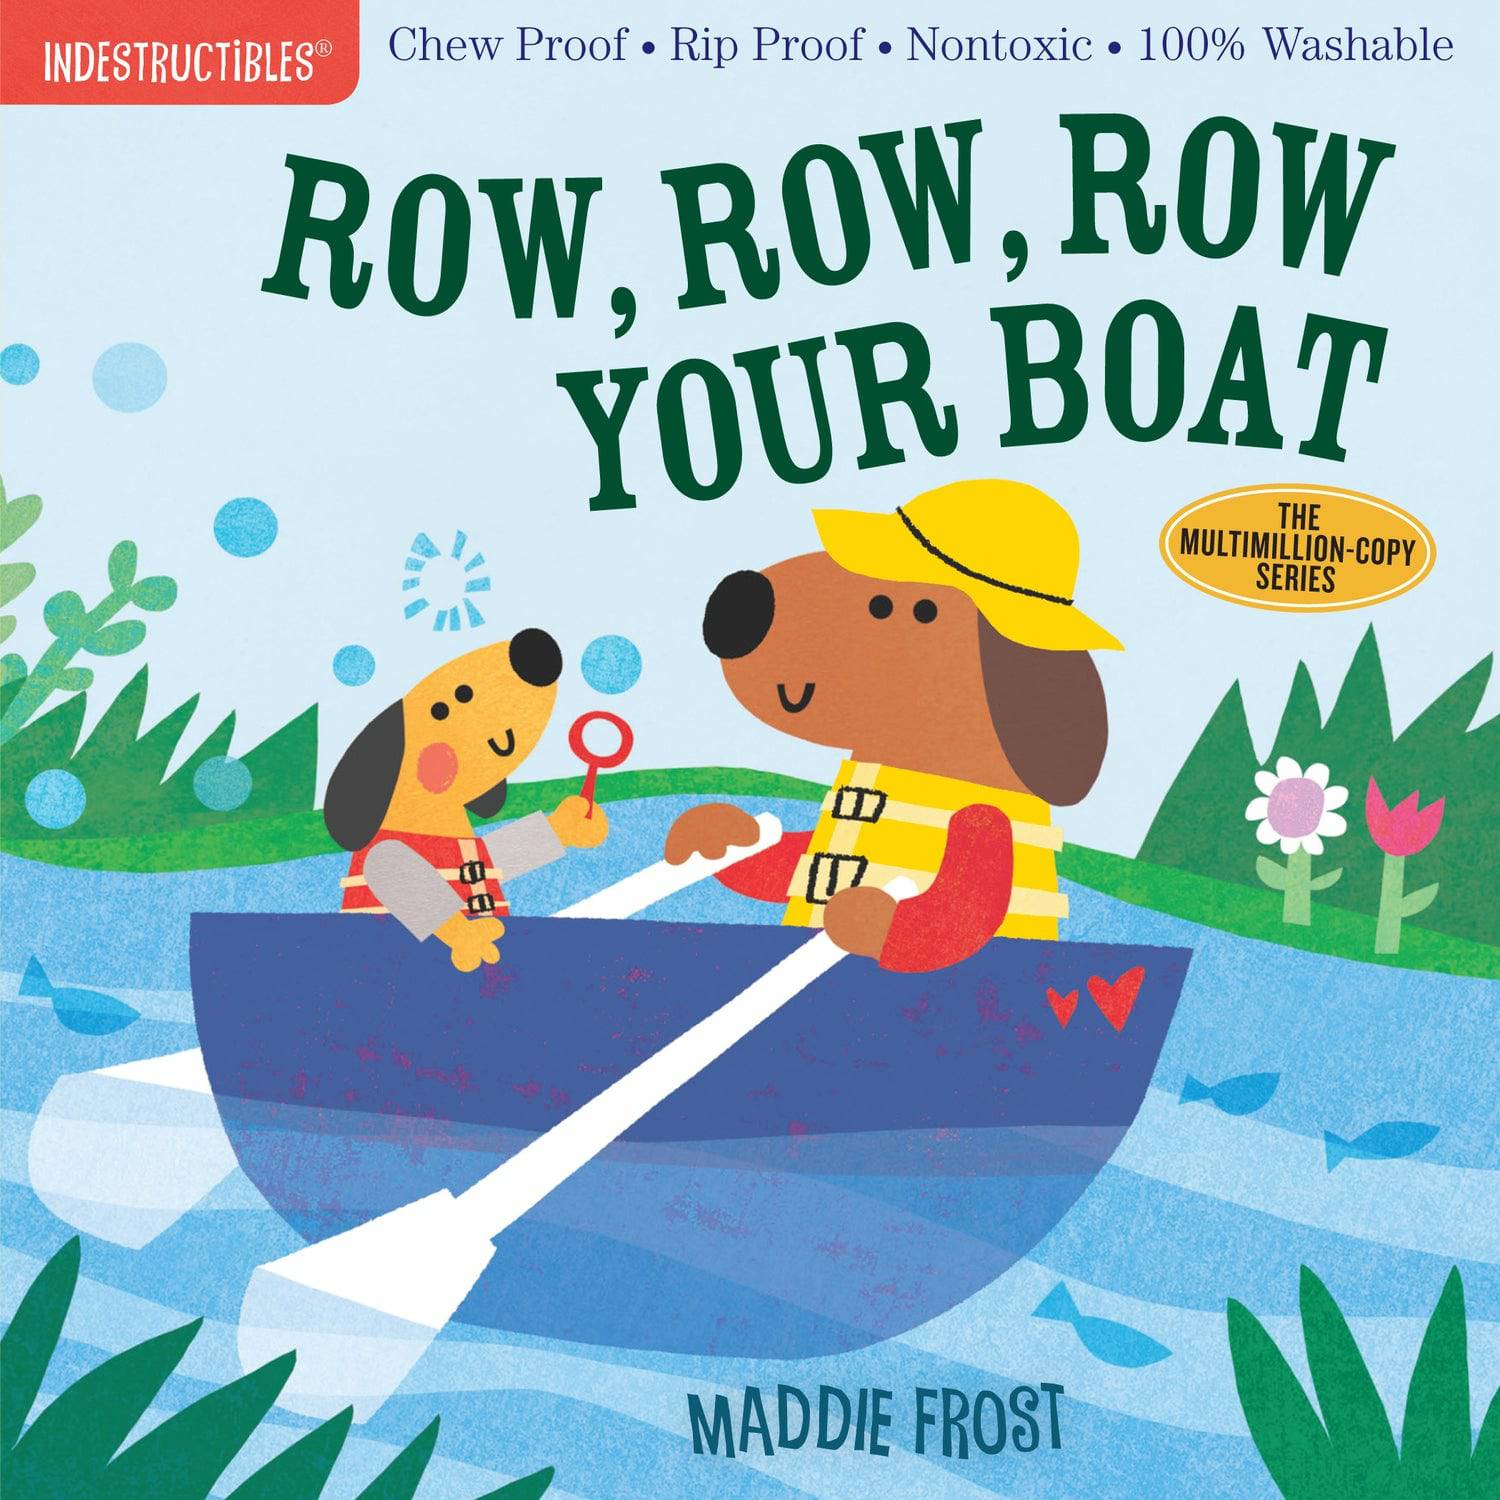 INDESTRUCTIBLES ROW YOUR BOAT - A Child's Delight